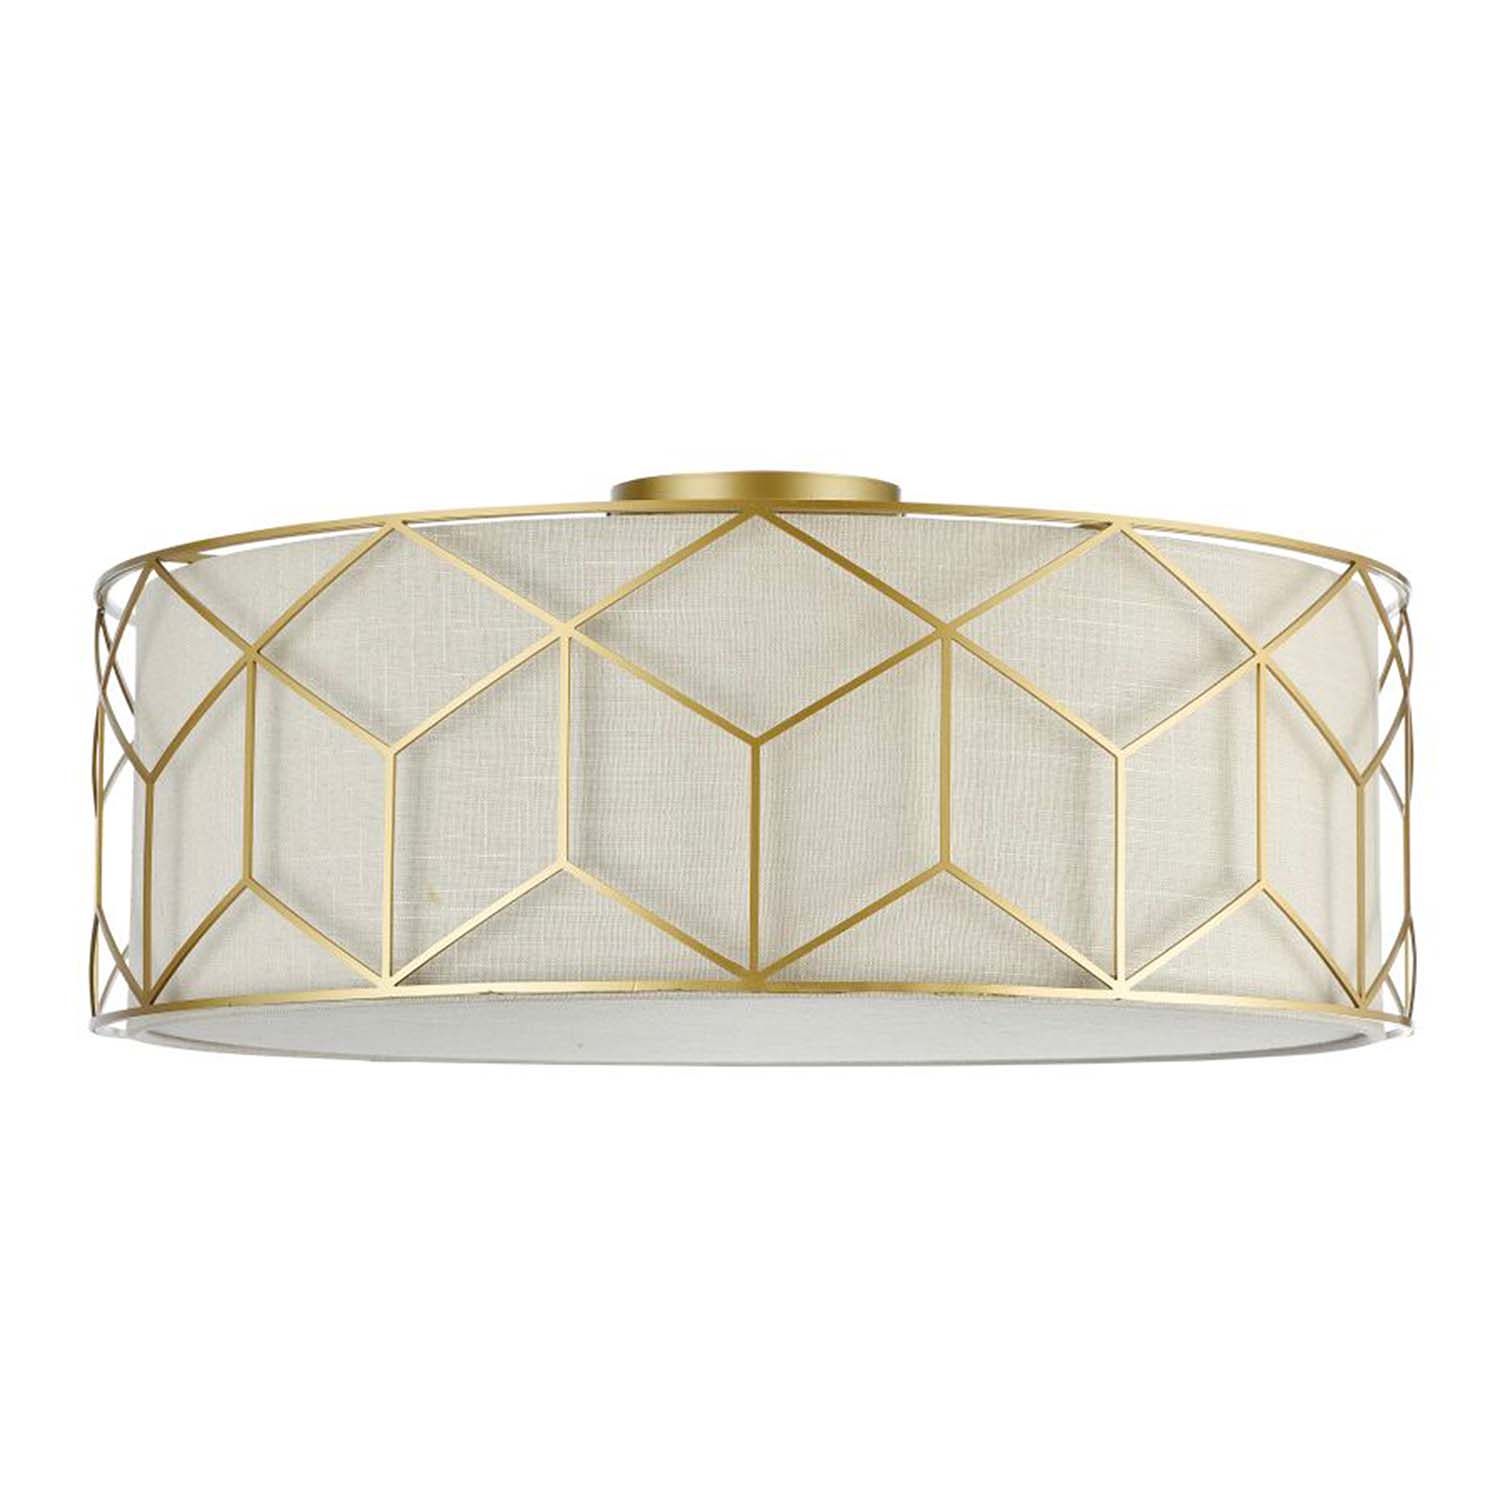 MESSINA - Art Deco Ceiling Light in Fabric and Geometric Gold